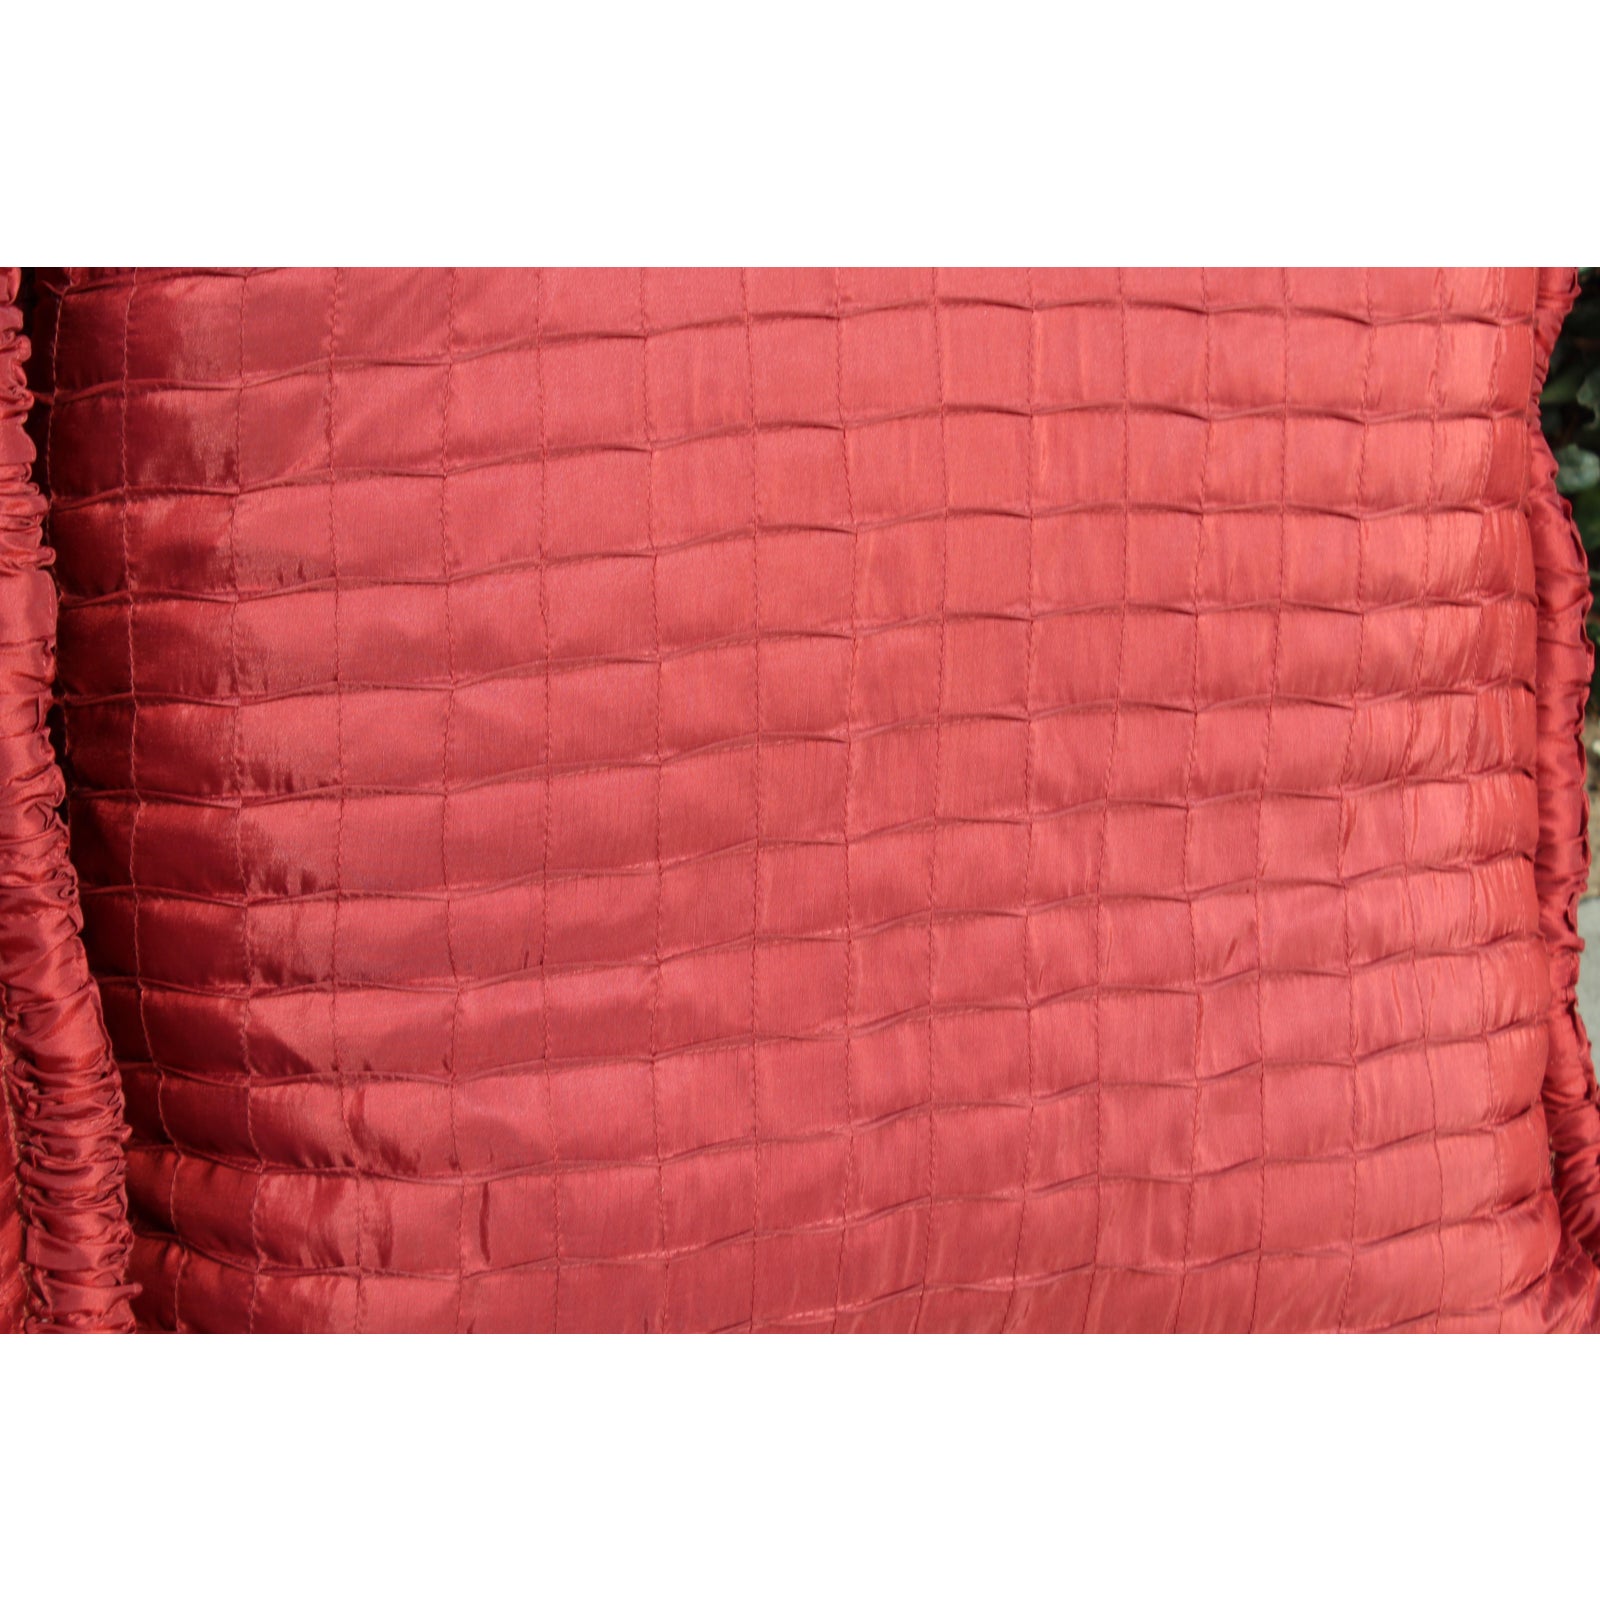 contemporary-red-down-filled-pillows-a-pair-0505